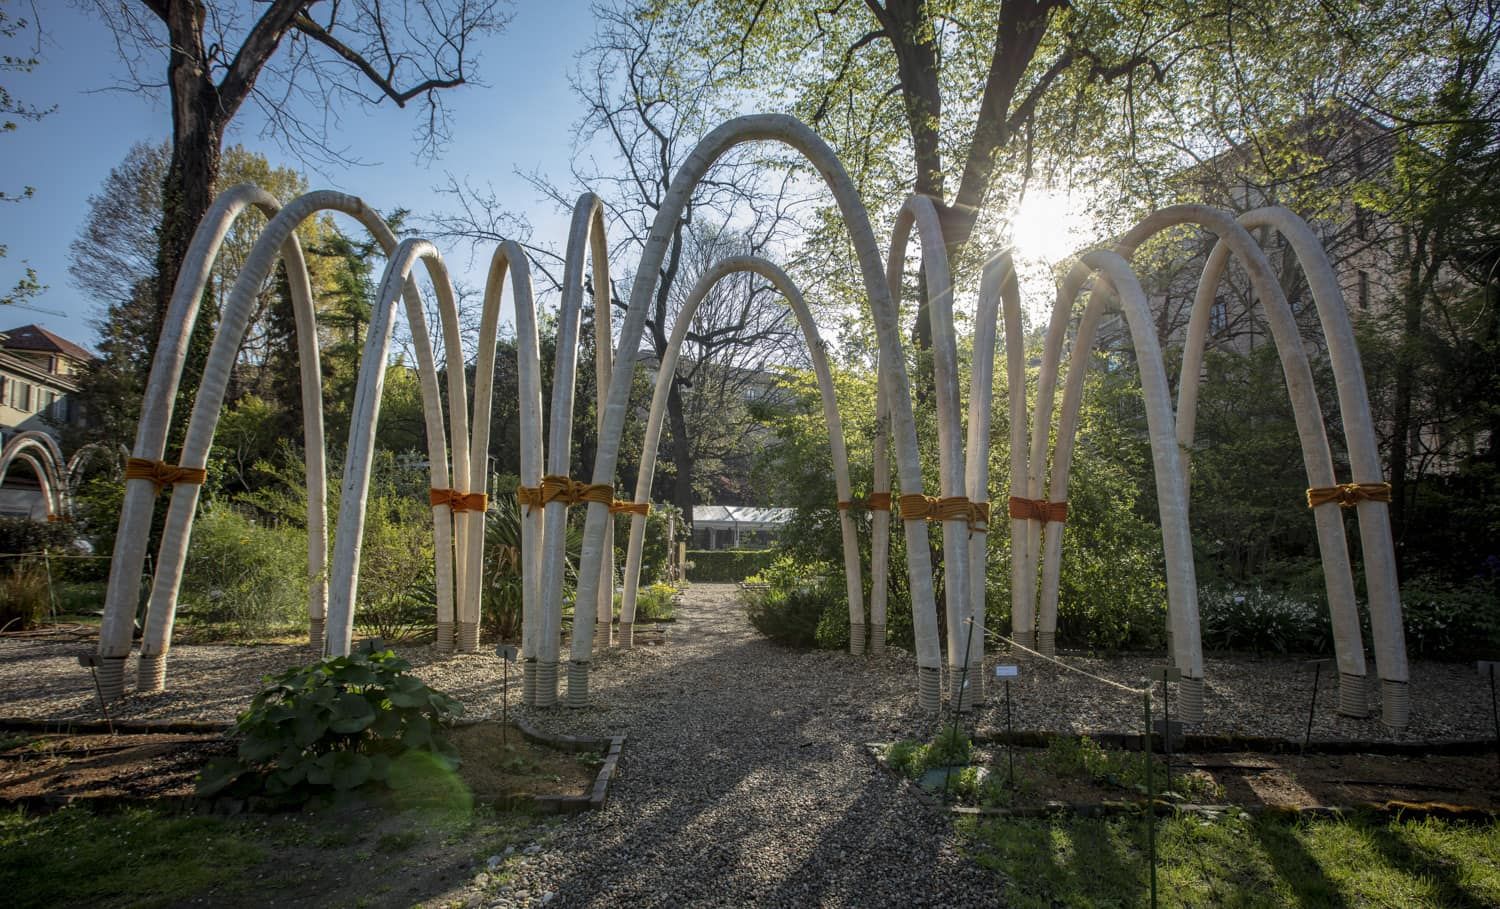 The installation of arched structures built out of Mycelium at its site